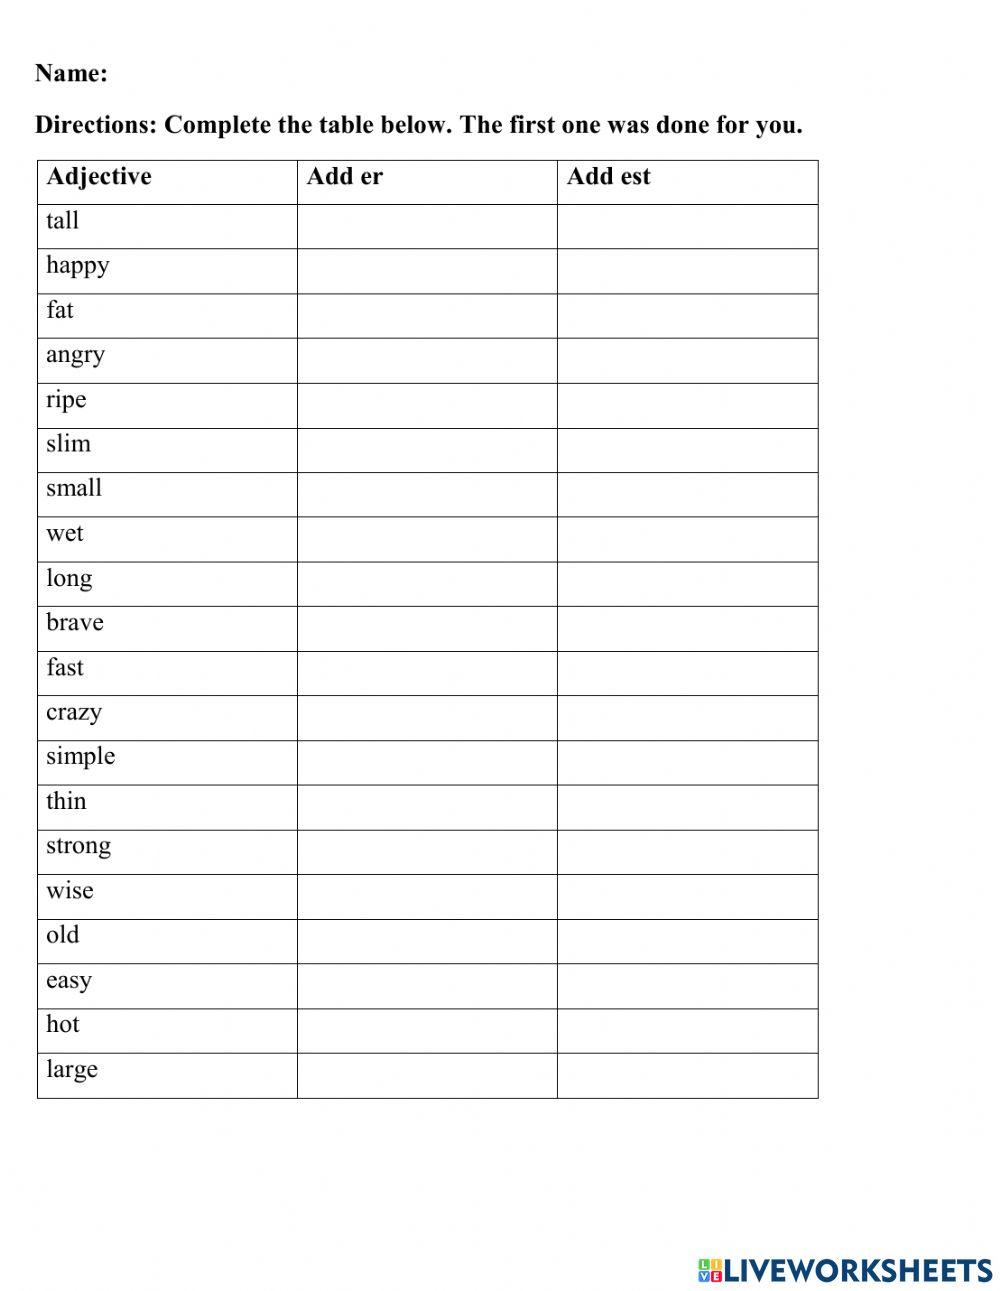 Adding er and est to adjectives